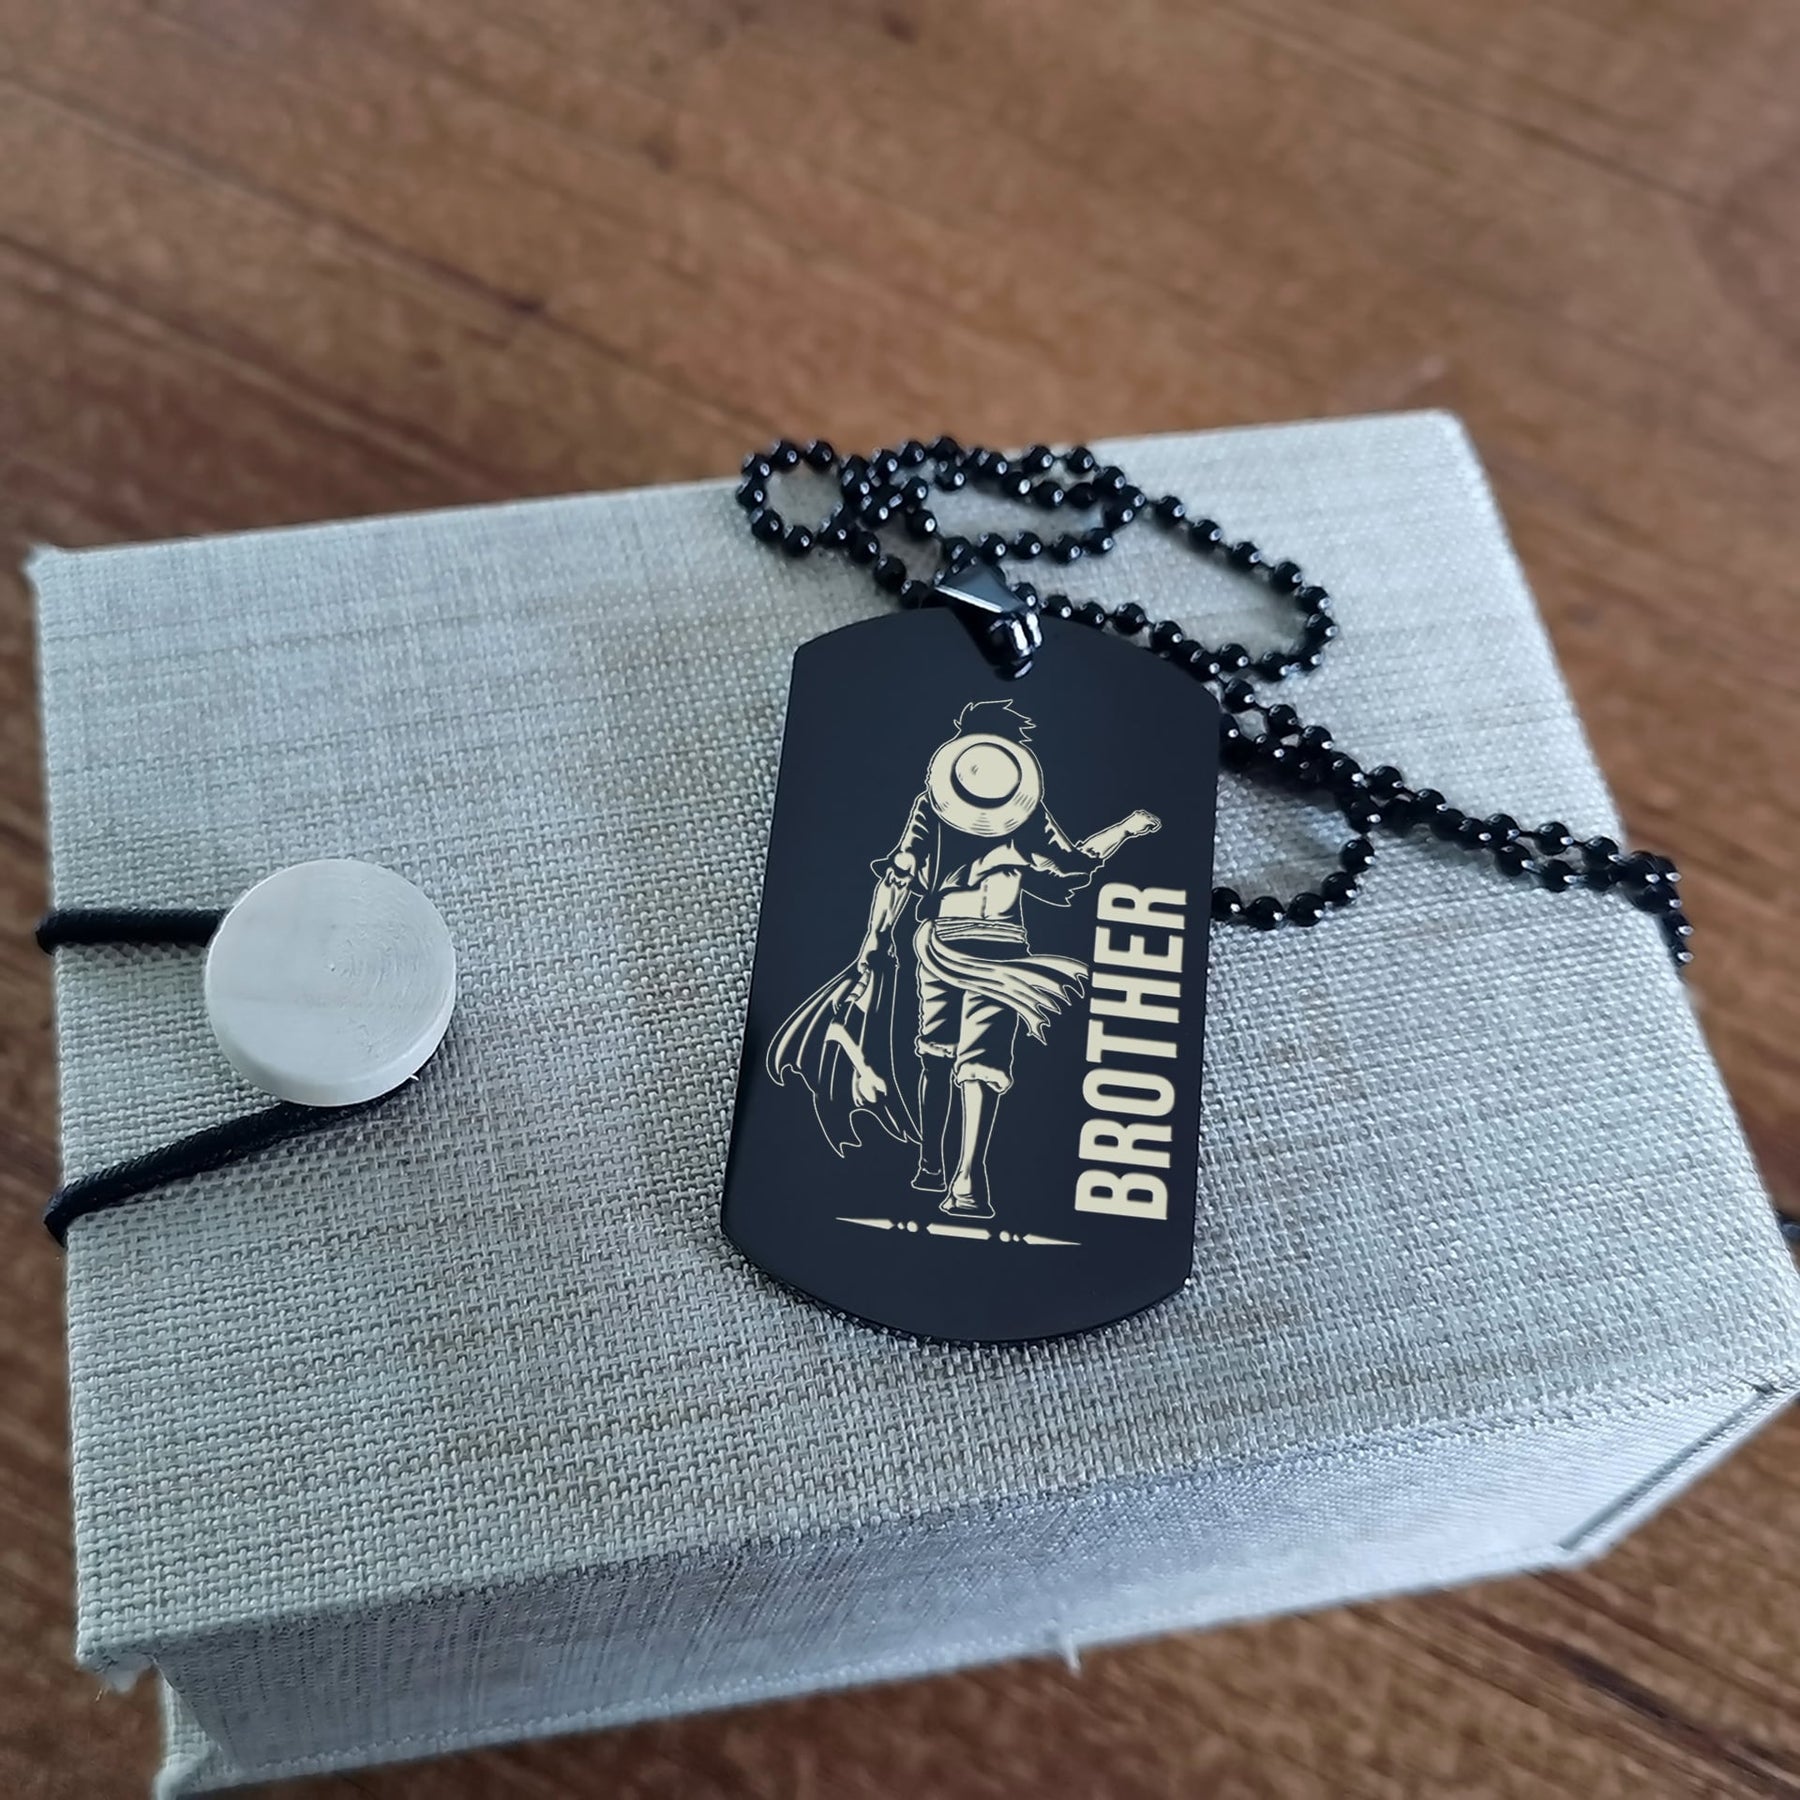 OPD021 - Brother Forever - Monkey D. Luffy - Roronoa Zoro - One Piece Dog Tag - Engrave Double Sided Black Dog Tag